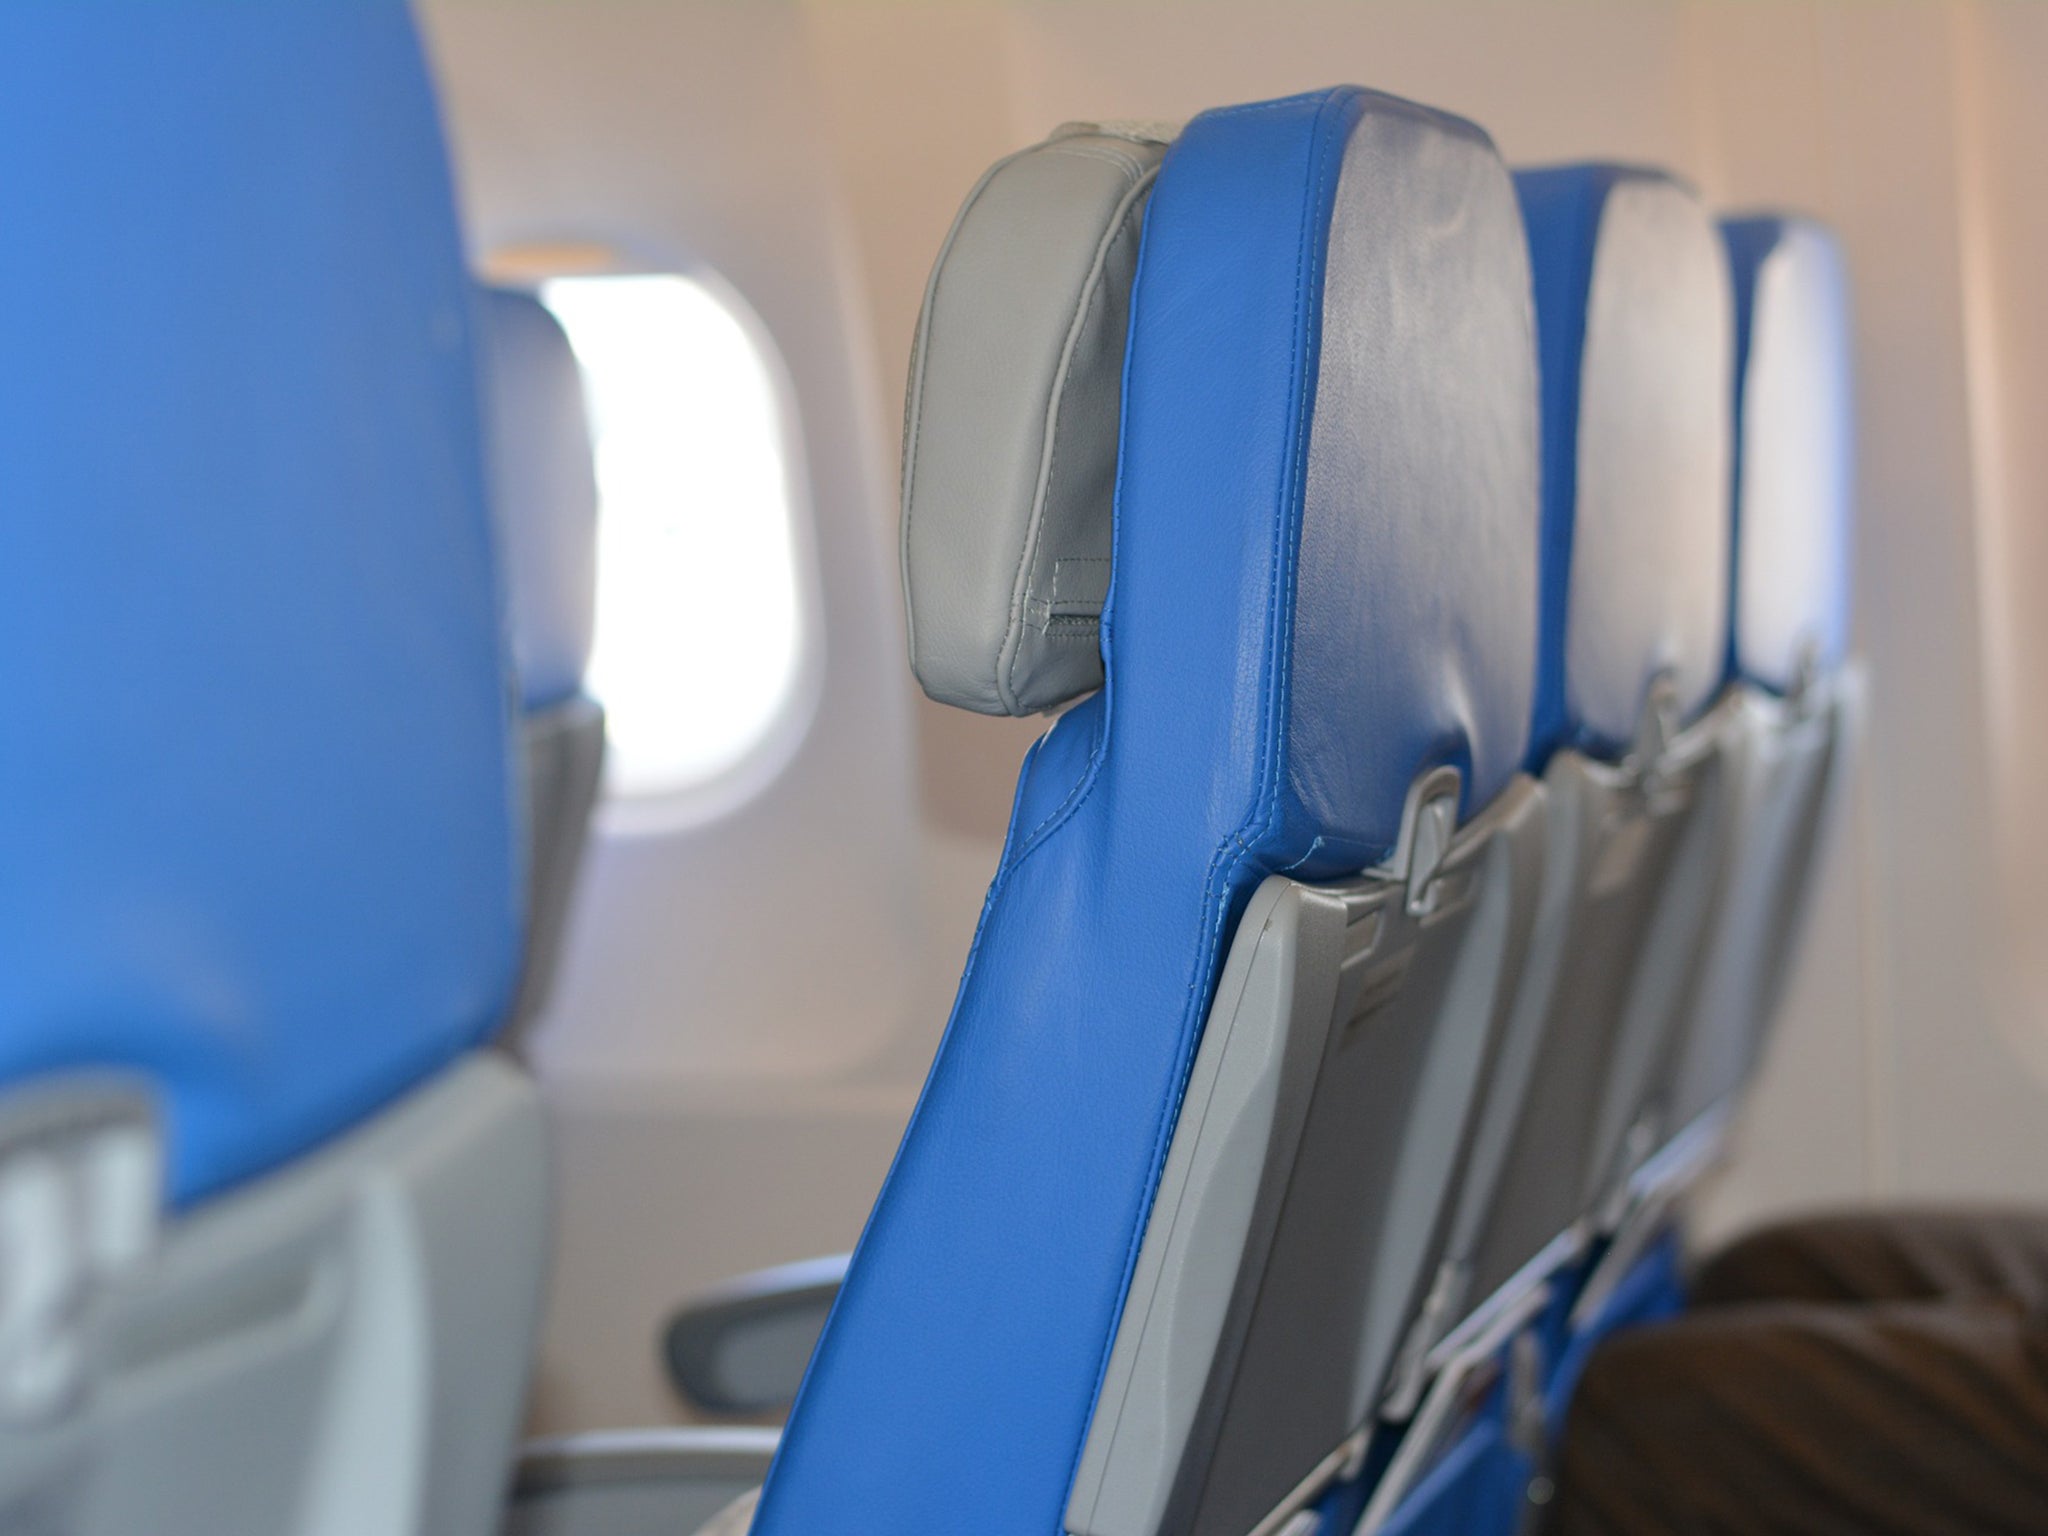 Why You Have to Put Your Seat Upright During Takeoff and Landing